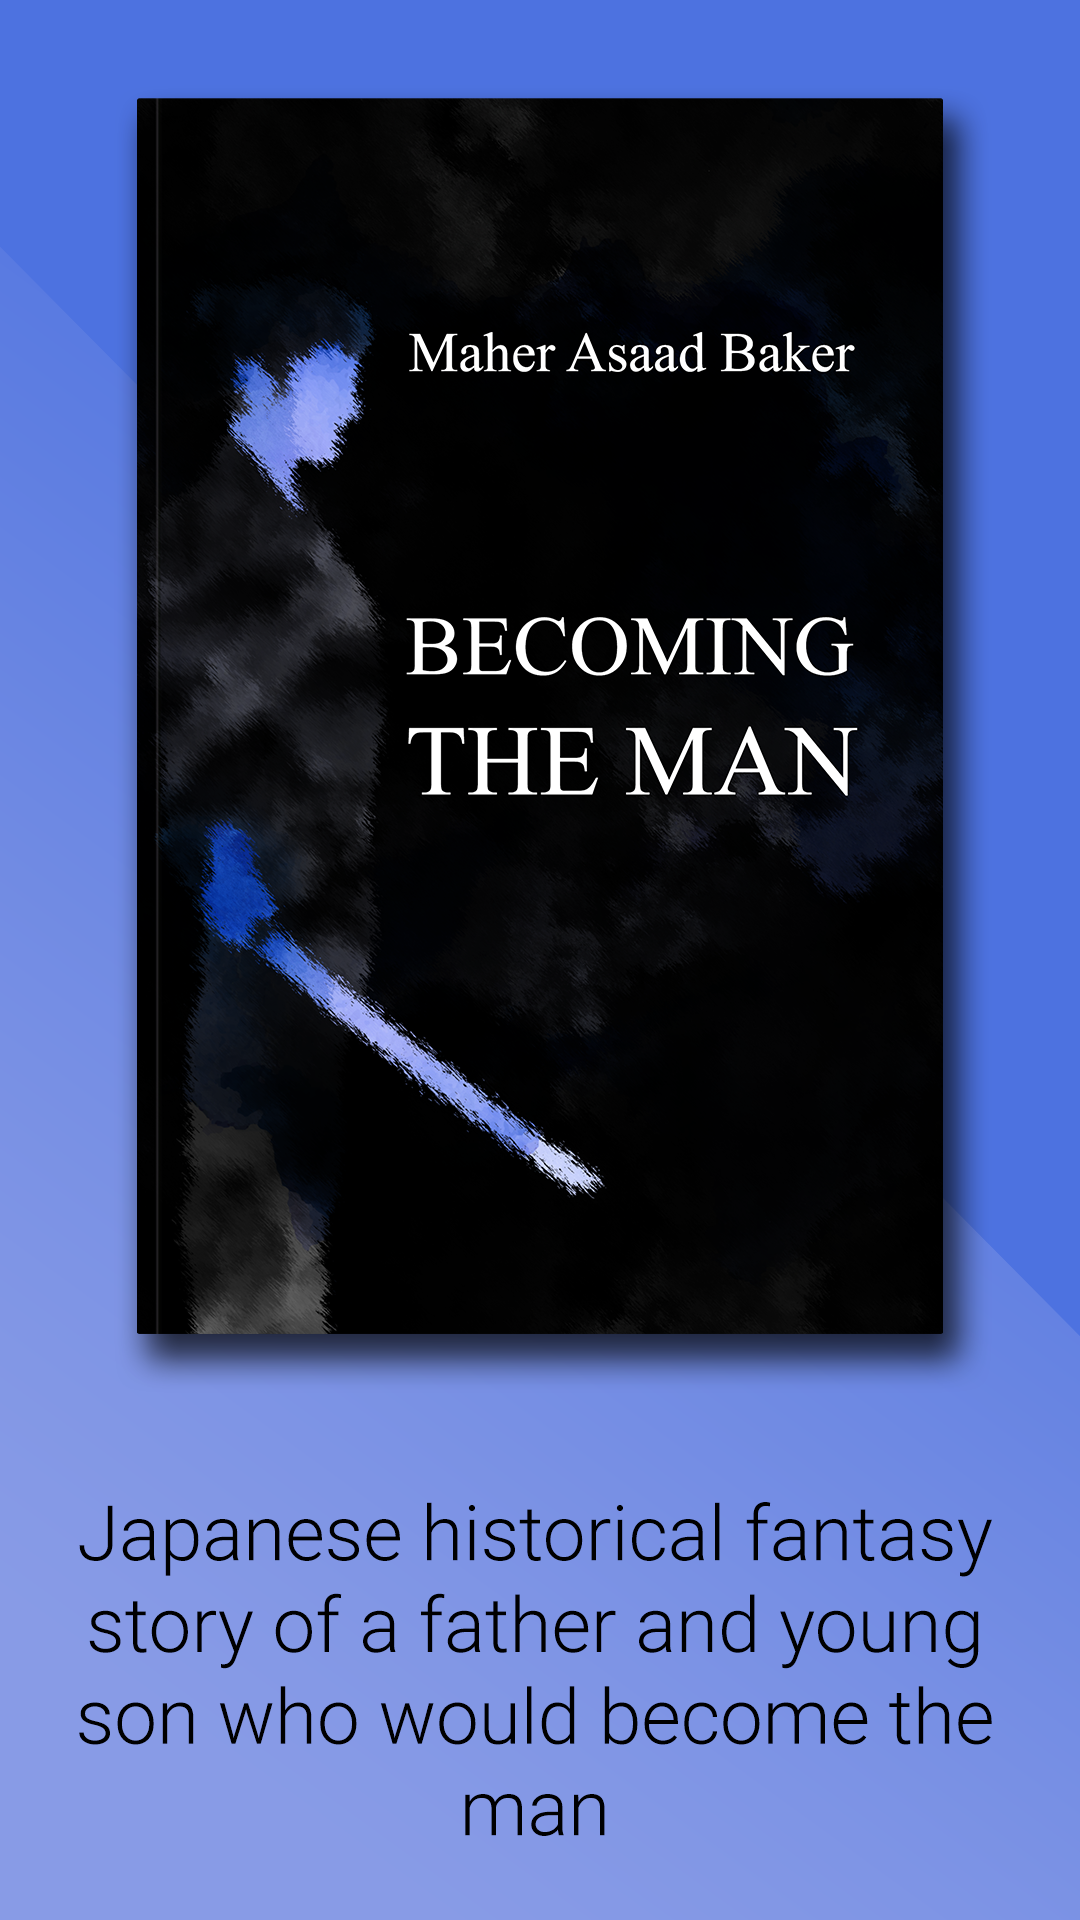 Becoming the man